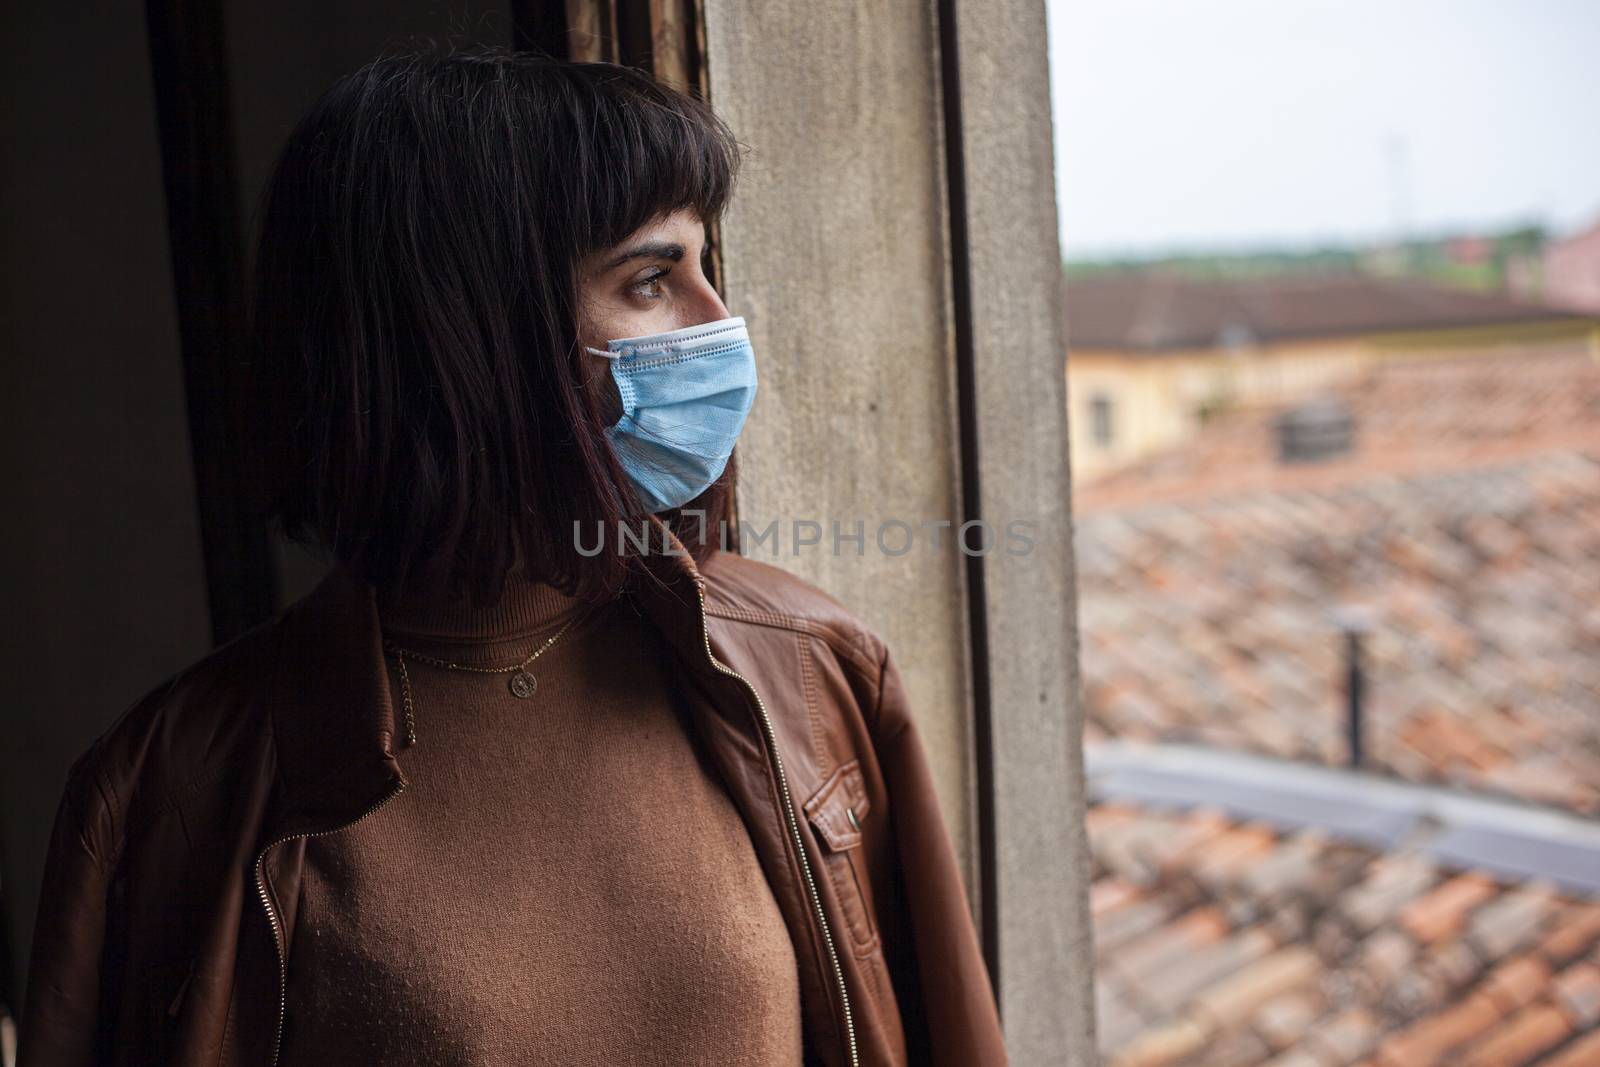 Girl with medical mask at window 13 by pippocarlot